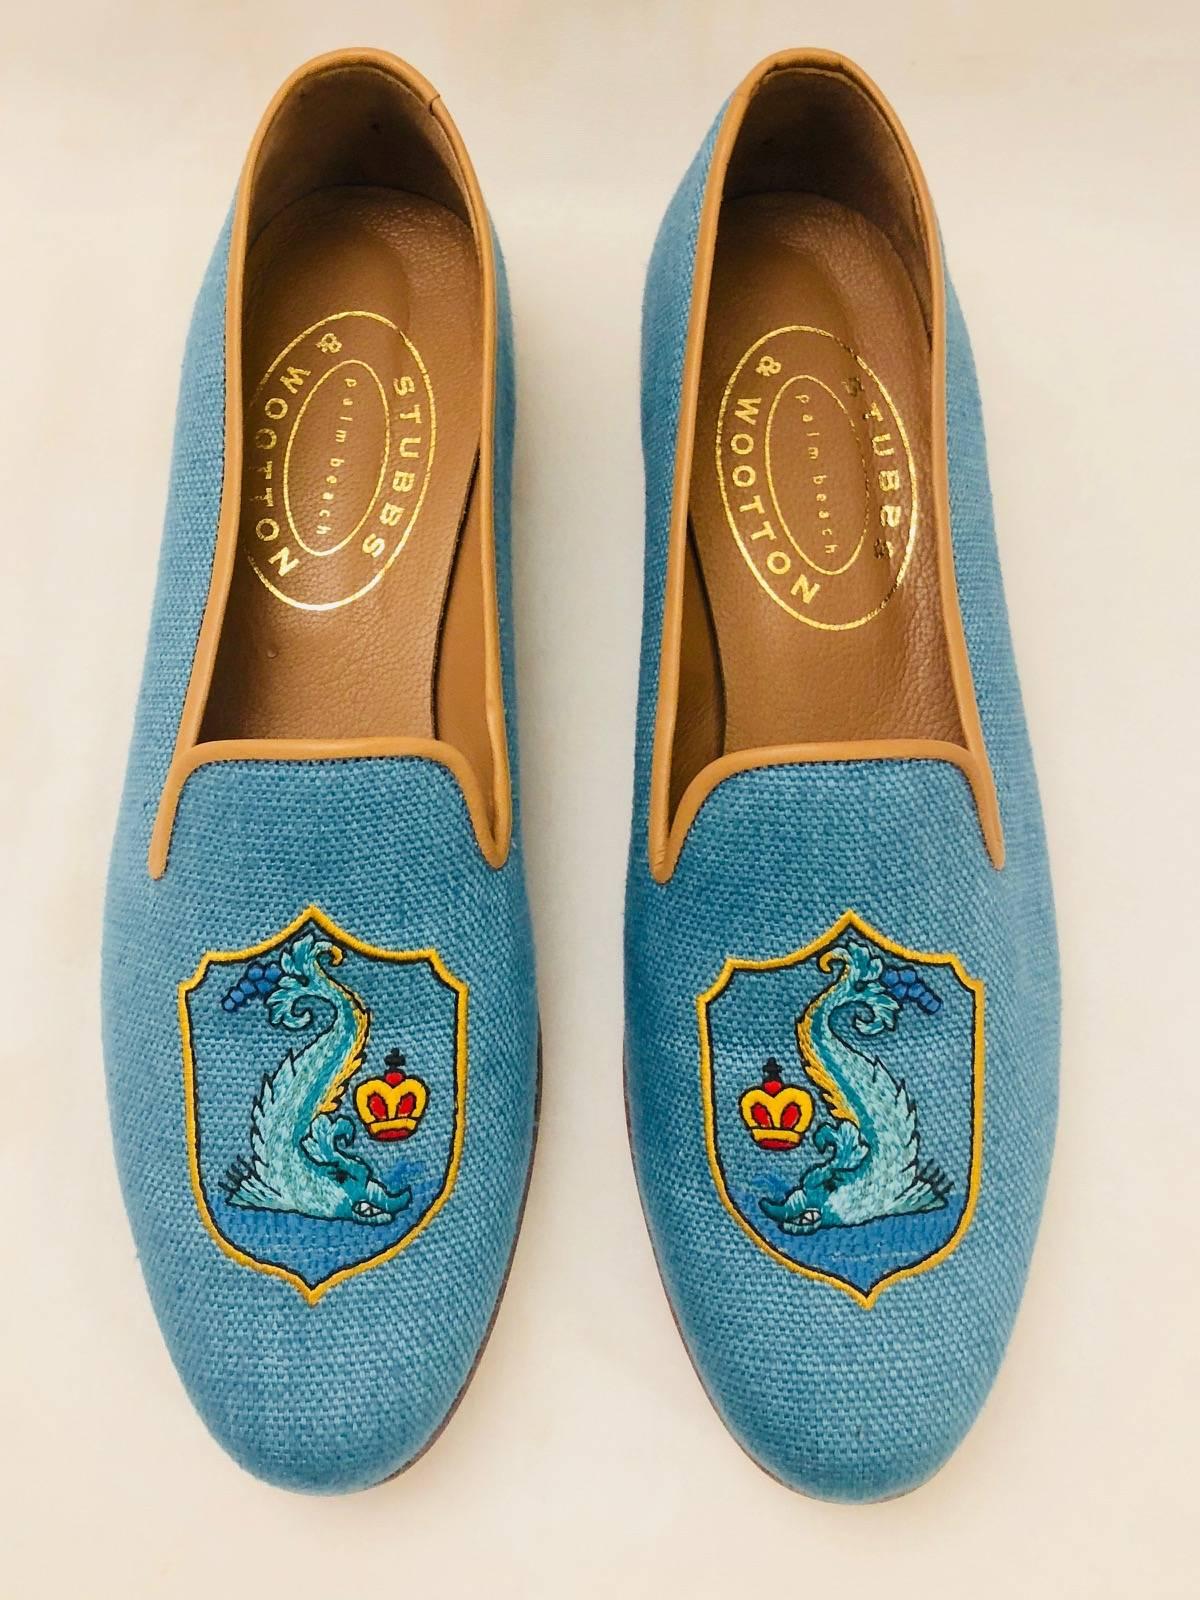 Renowned footwear in and out of Palm Beach, these Stubbs & Wootton Slippers are simply a must for any connoisseur of these fine footwear.   Crafted in Spain, these signature needlepoint fabric shoes feature a tempting shade of light turquoise and